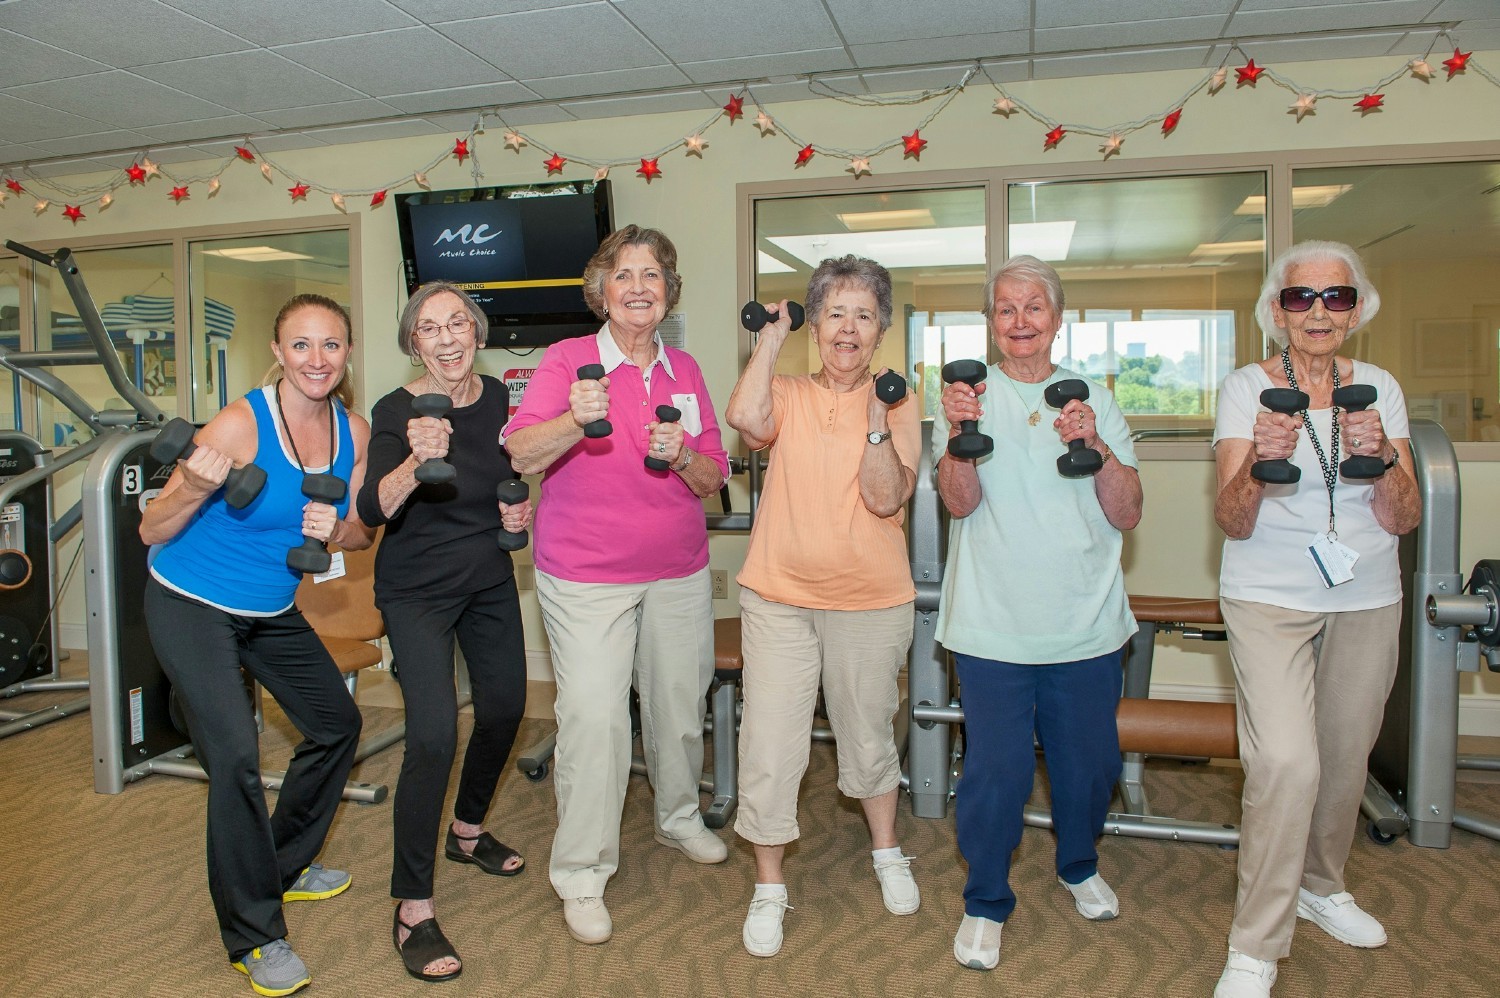 Our Doylestown residents take advantage of the variety of fitness classes offered in our exercise studio.